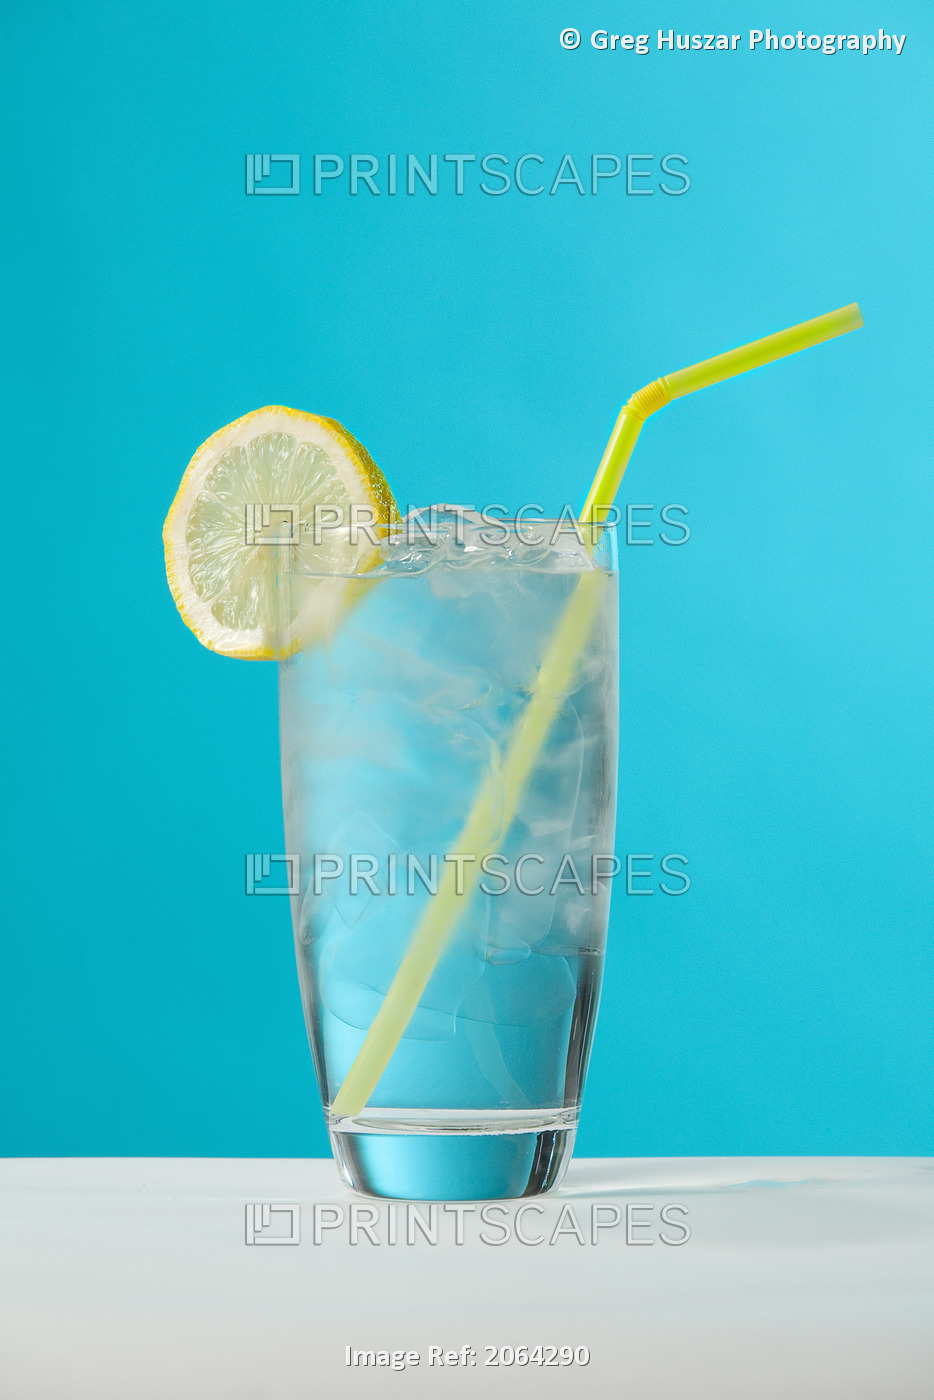 Clear Glass Of Water With Lemon And Drinking Straw